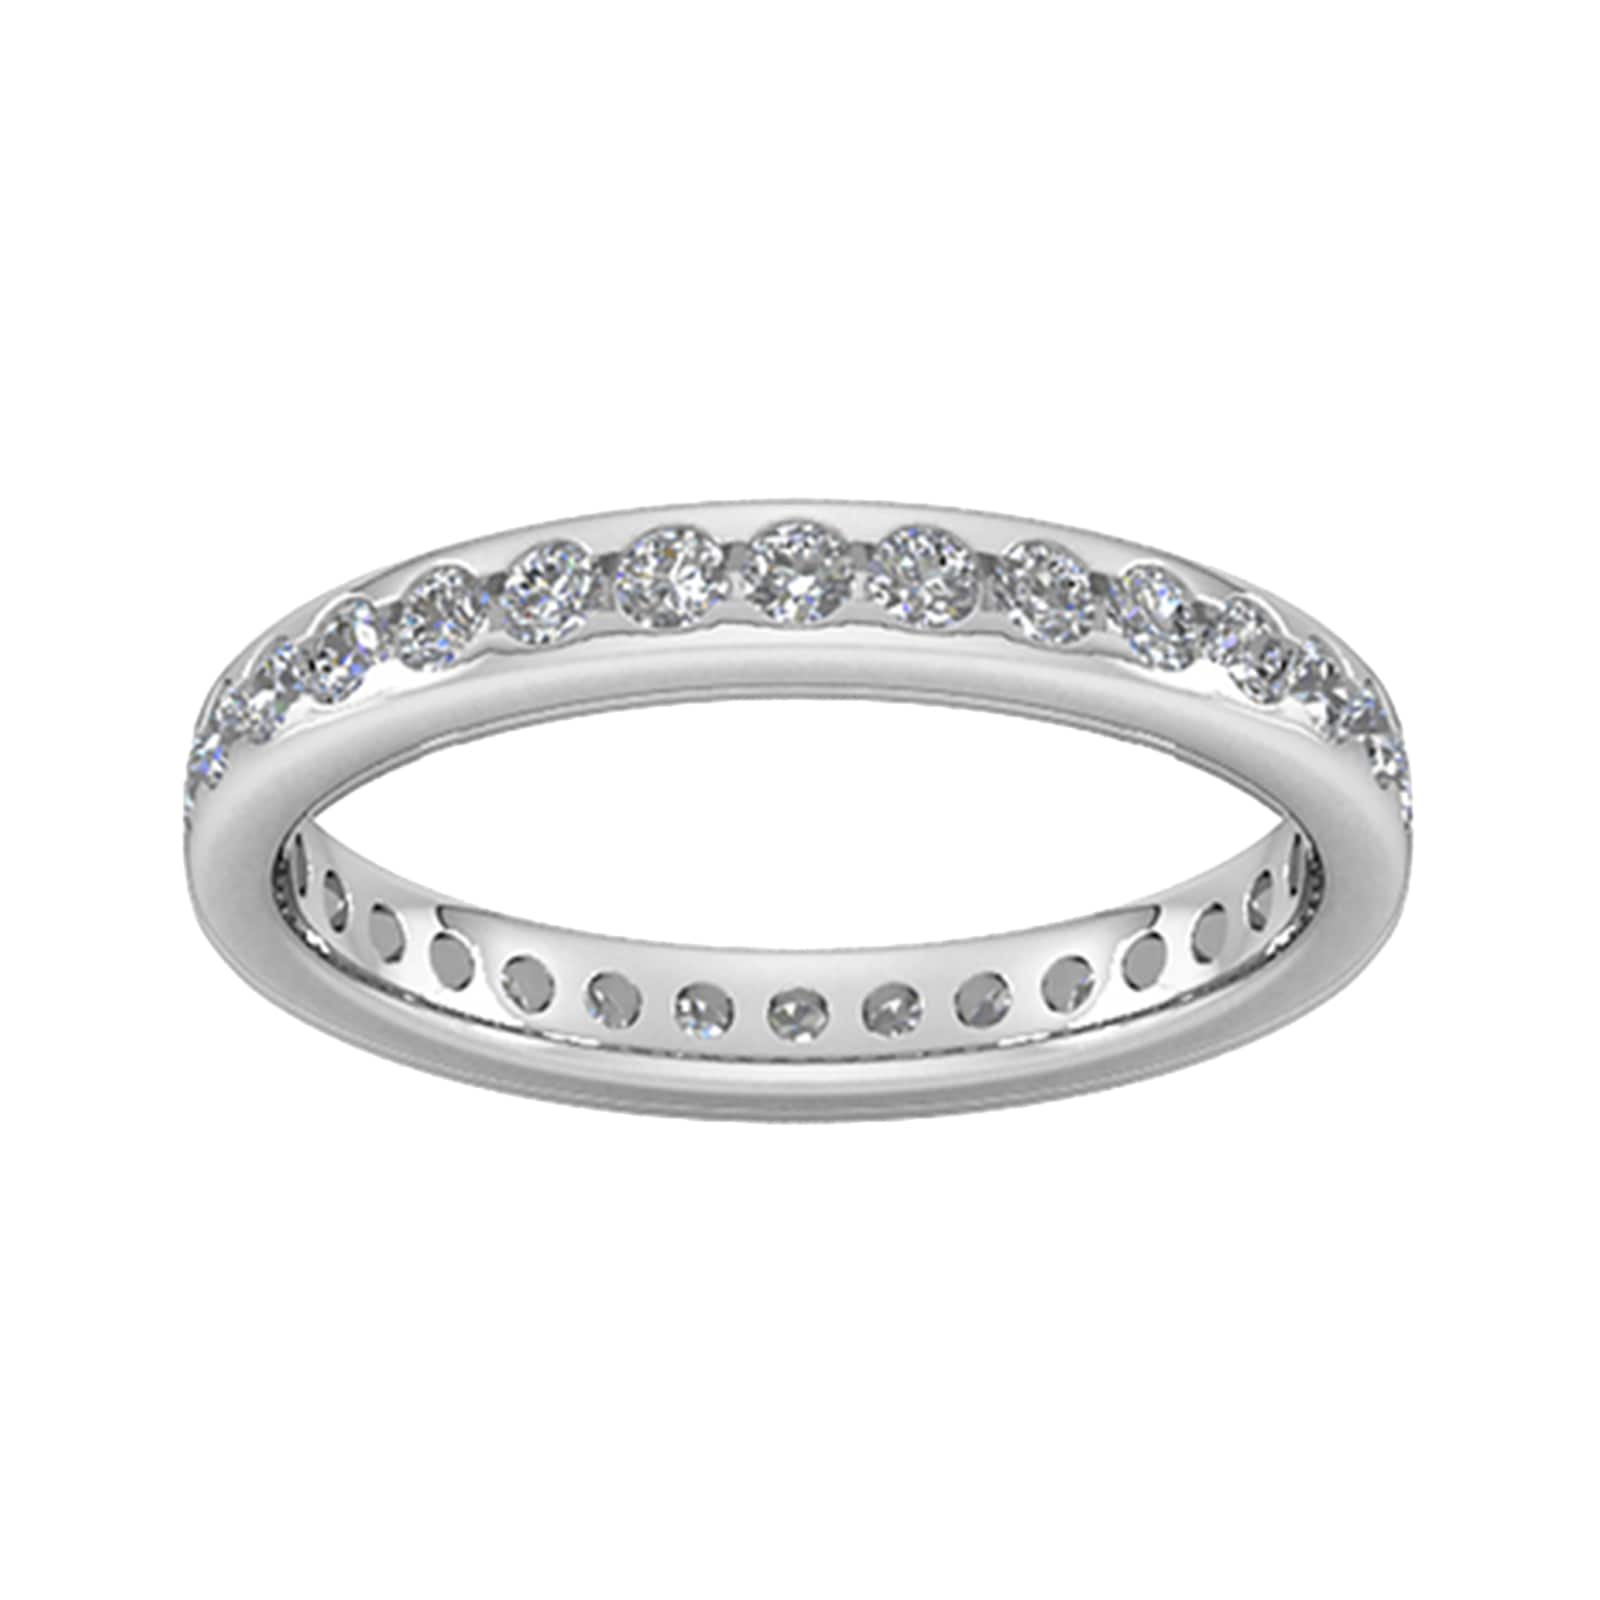 0.81 Carat Total Weight Brilliant Cut Scalloped Channel Set Diamond Wedding Ring In 18 Carat White Gold - Ring Size V